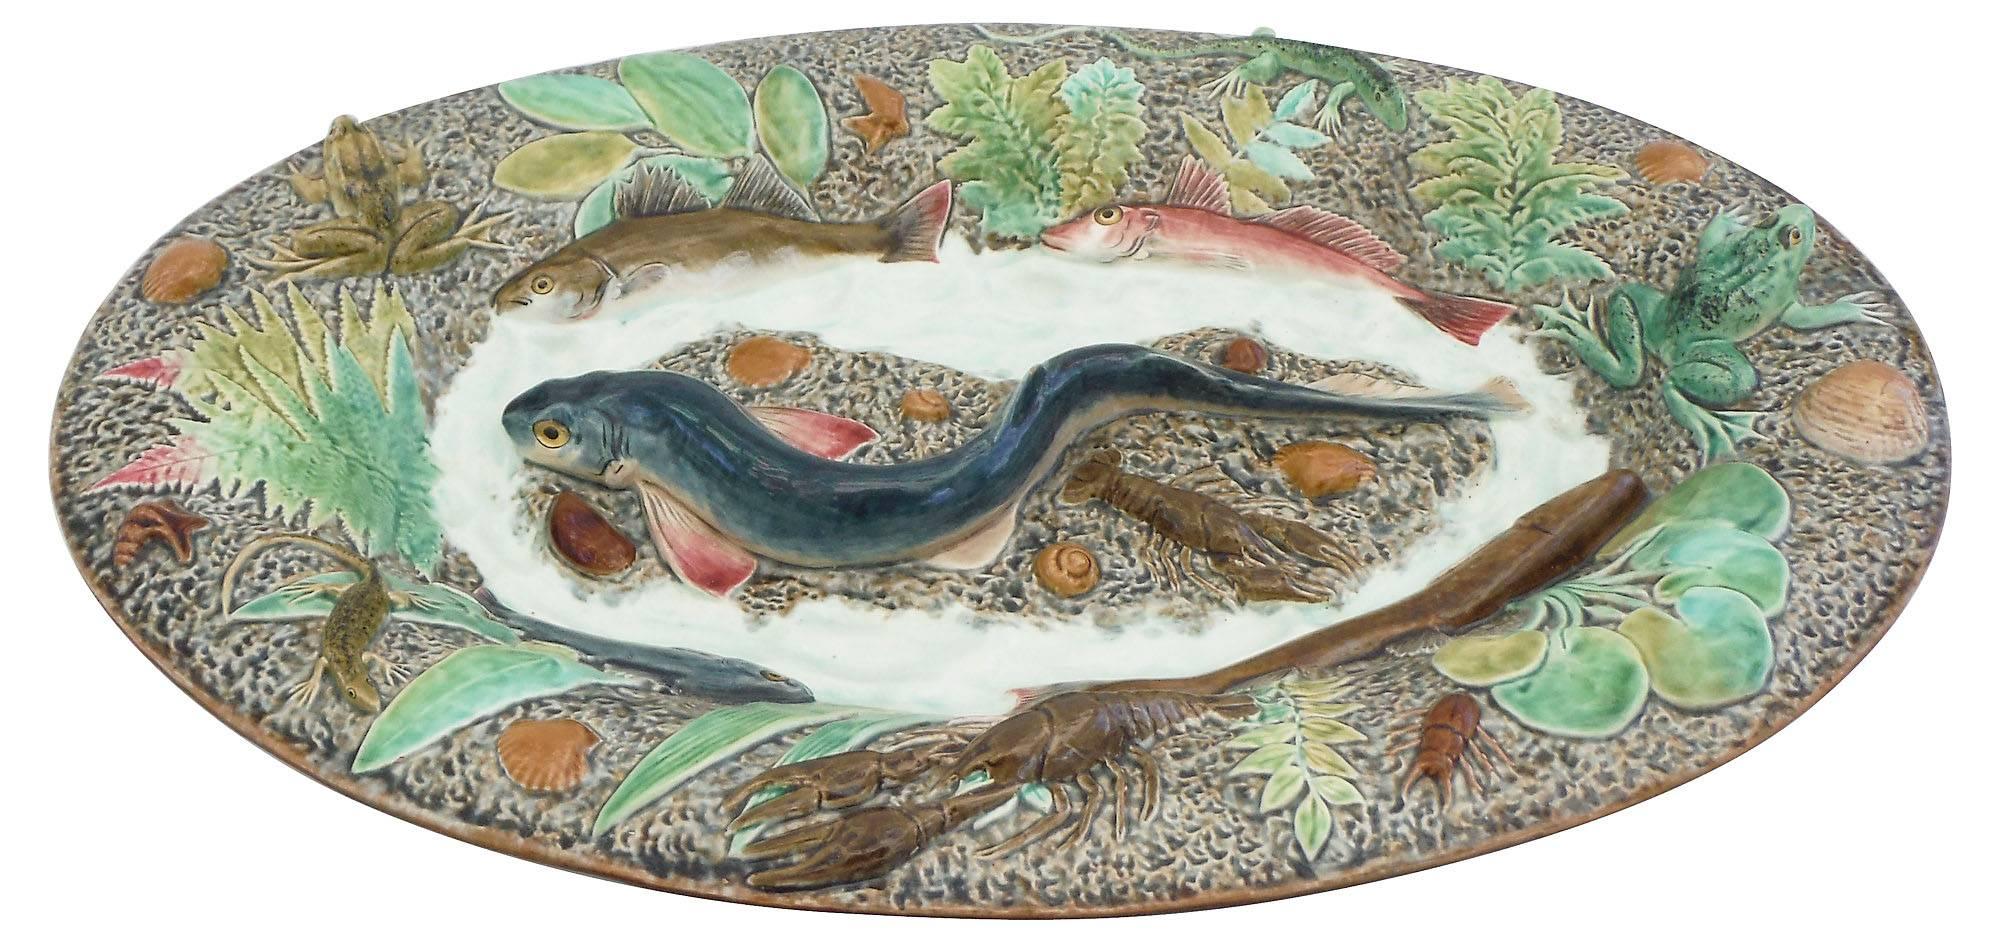 Large Palissy wall platter a large catshark on the center surrounded by four fishs, two frogs, two crawfishs, two lizards, shells and different greens plants, circa 1900, this platter is inspired by a Thomas Sergent platter and was made by a big